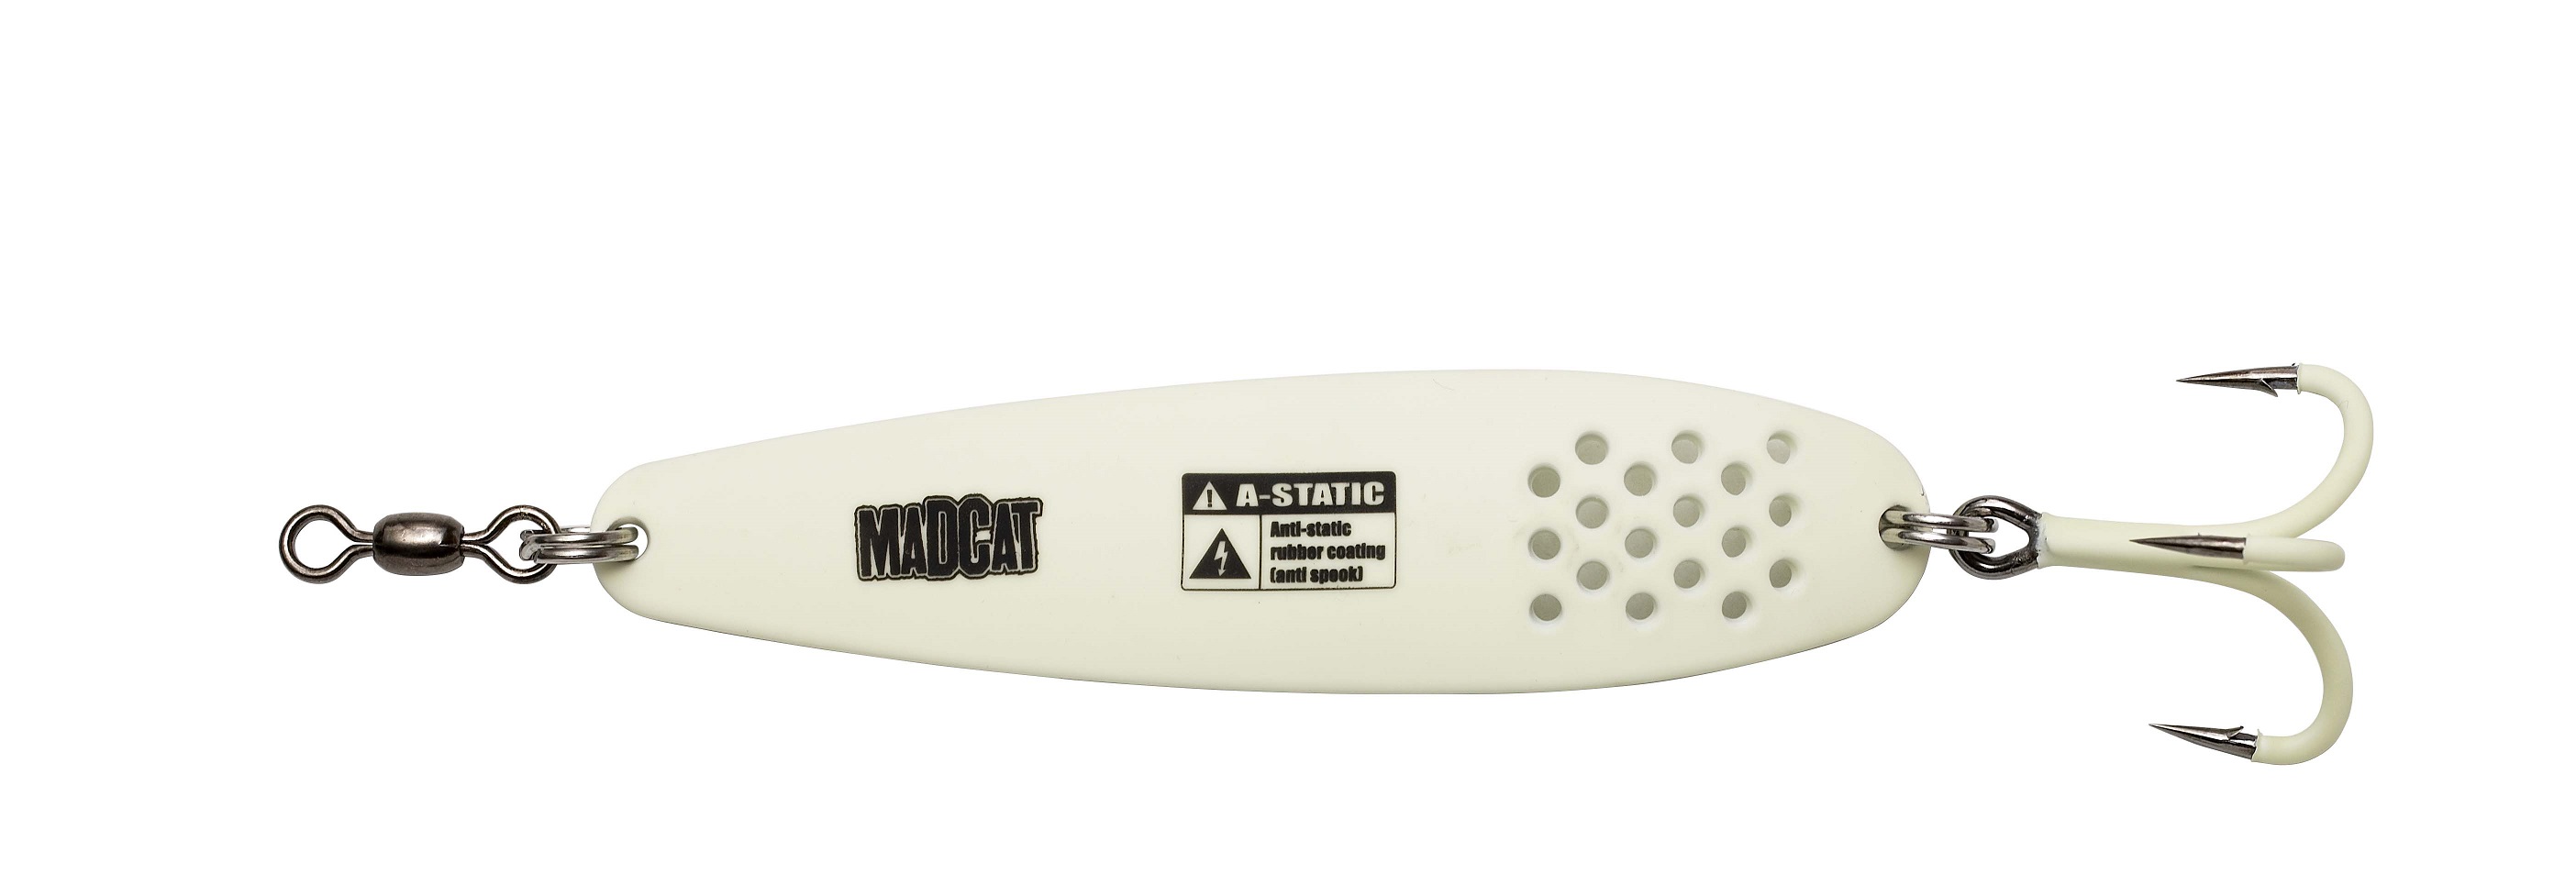 Madcat A-Static Turbine Meerval Spoon (90g) - Glow In The Dark